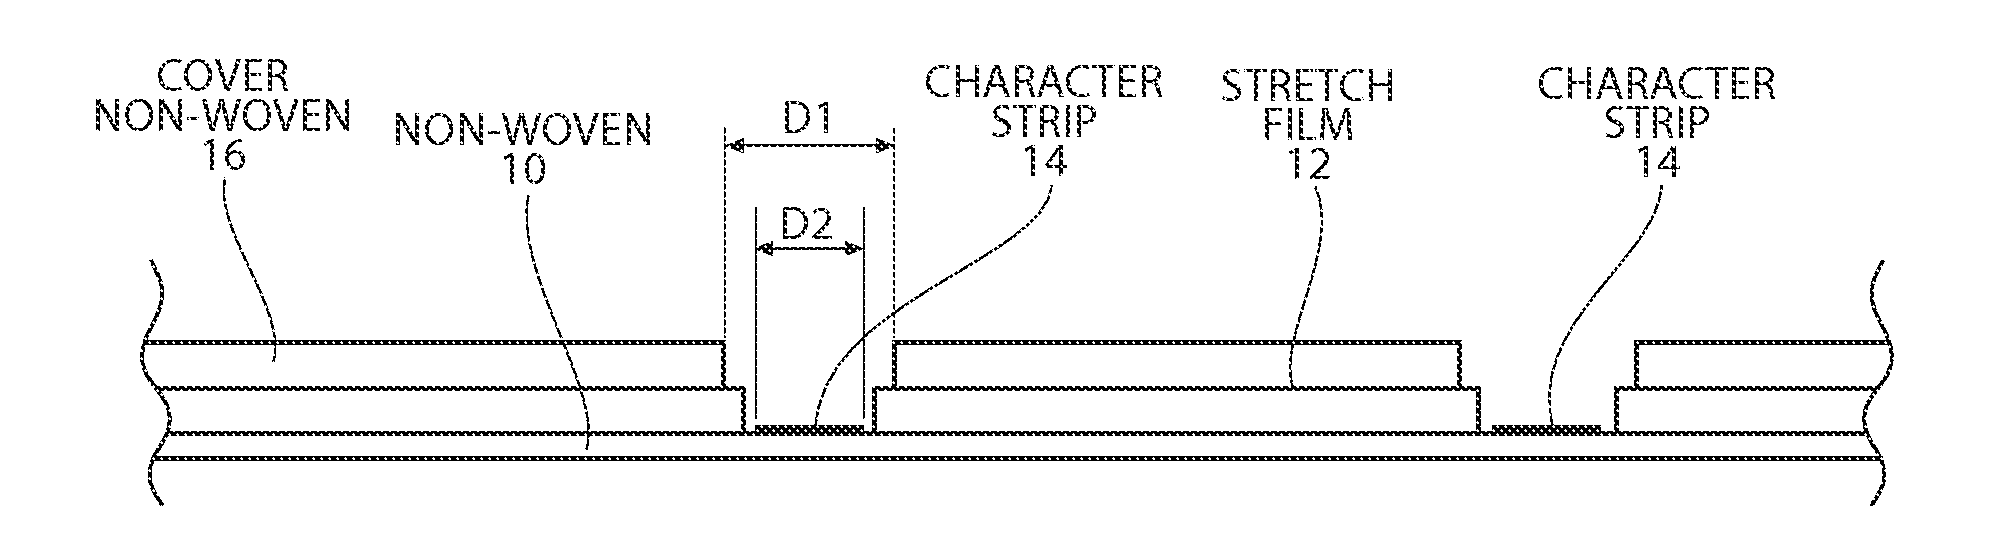 Apparatus and method for producing absorbent article with stretch film side panel and application of intermittent discrete components of an absorbent article